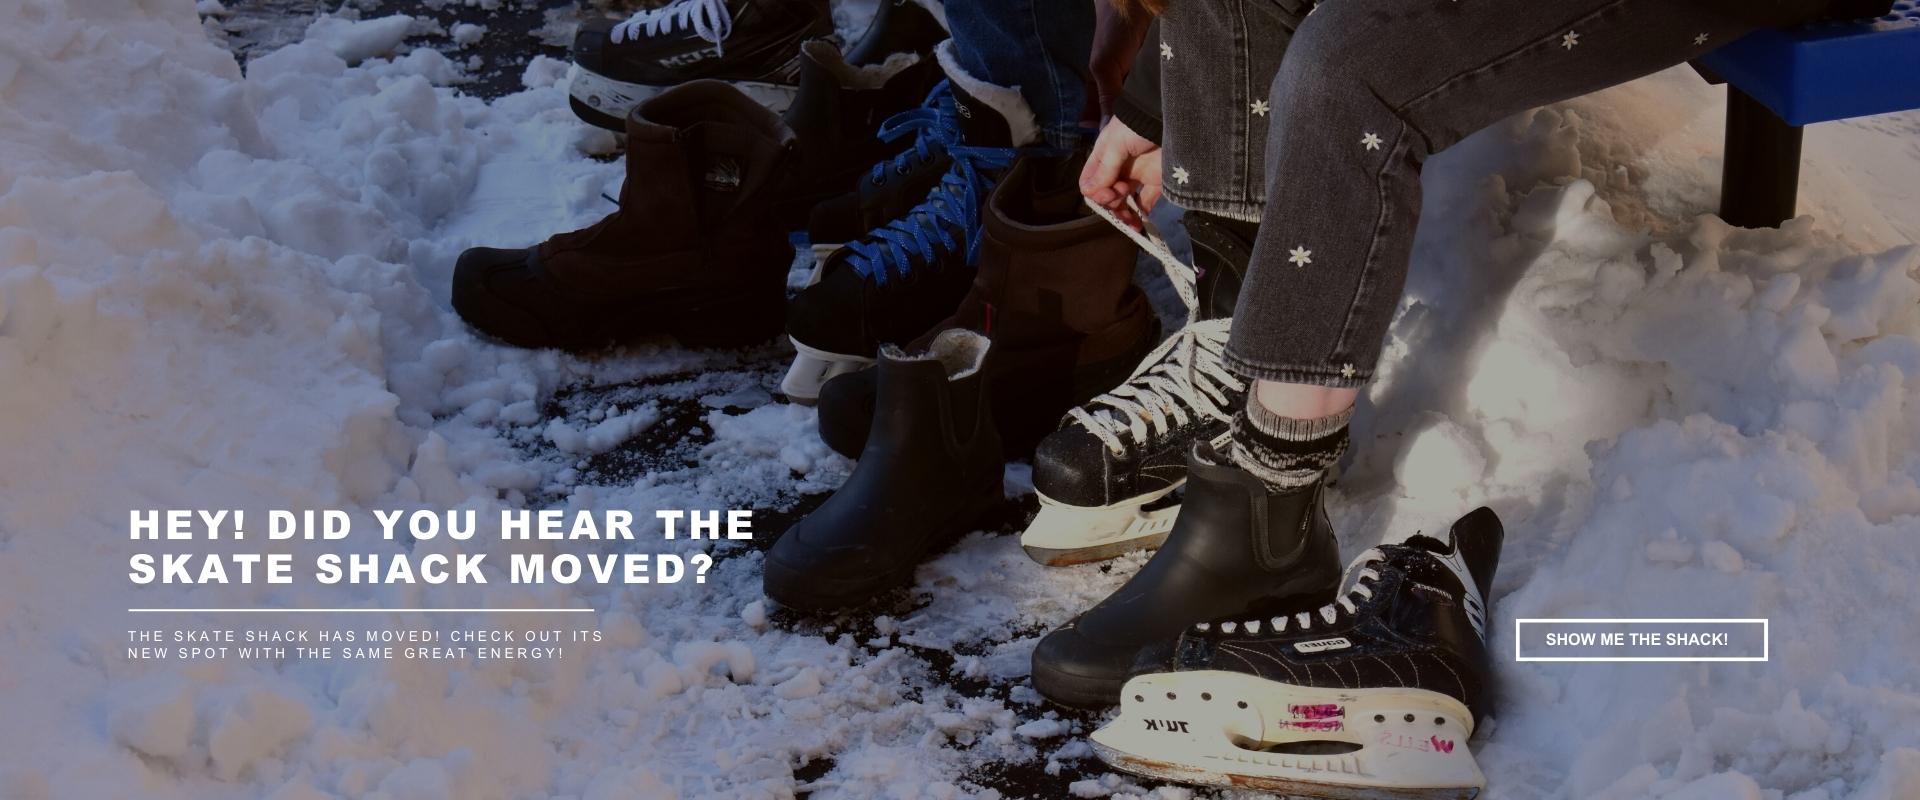 This image shows people lacing up their skates with text saying that the skate shack has moved and a button to learn more